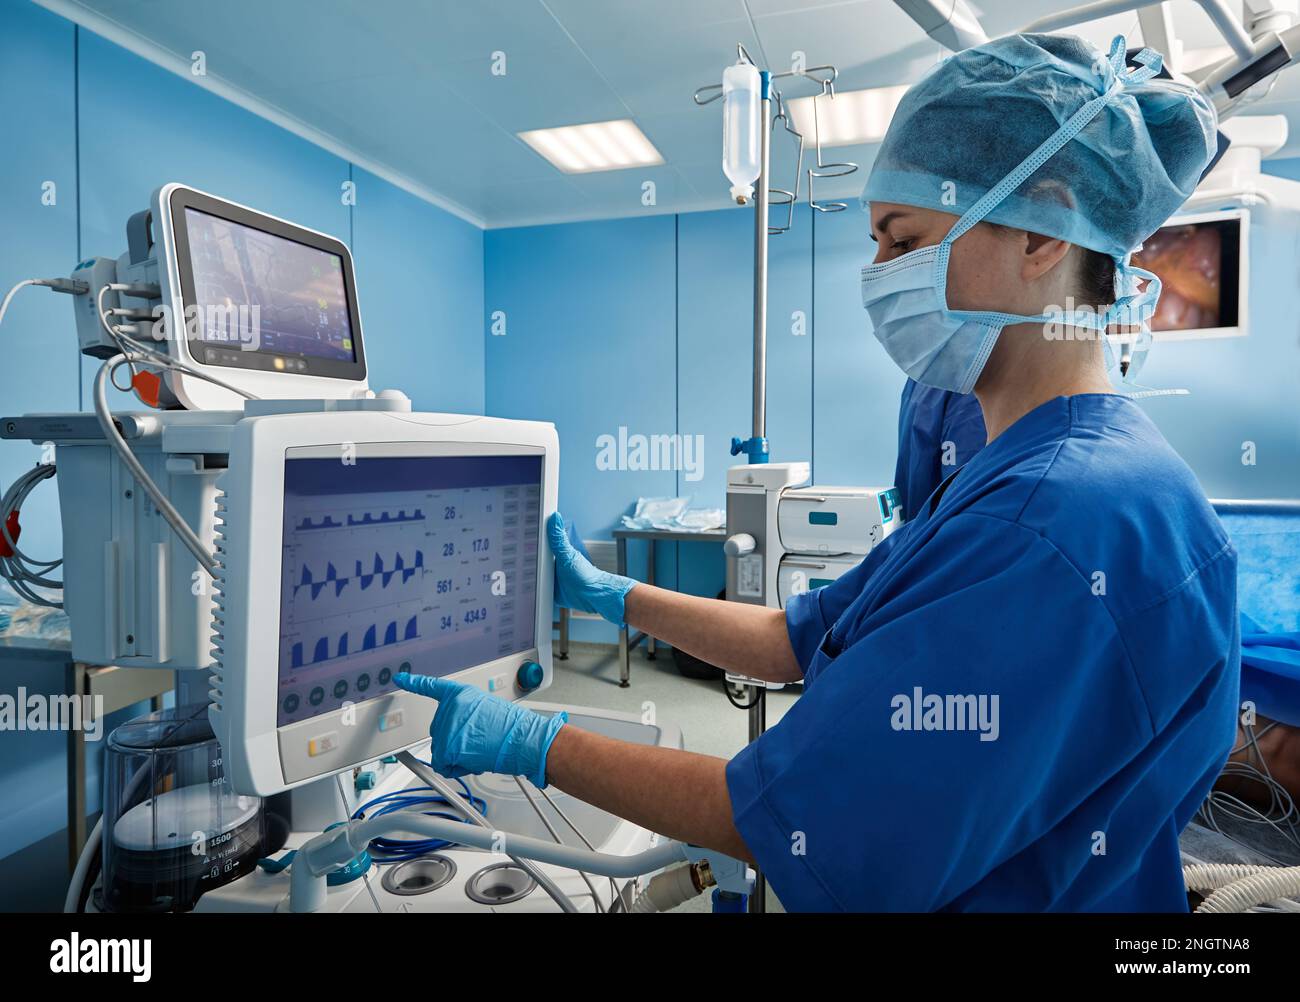 Nurse in operating room of hospital checking patient's vital signs while surgical operation. Surgical department Stock Photo